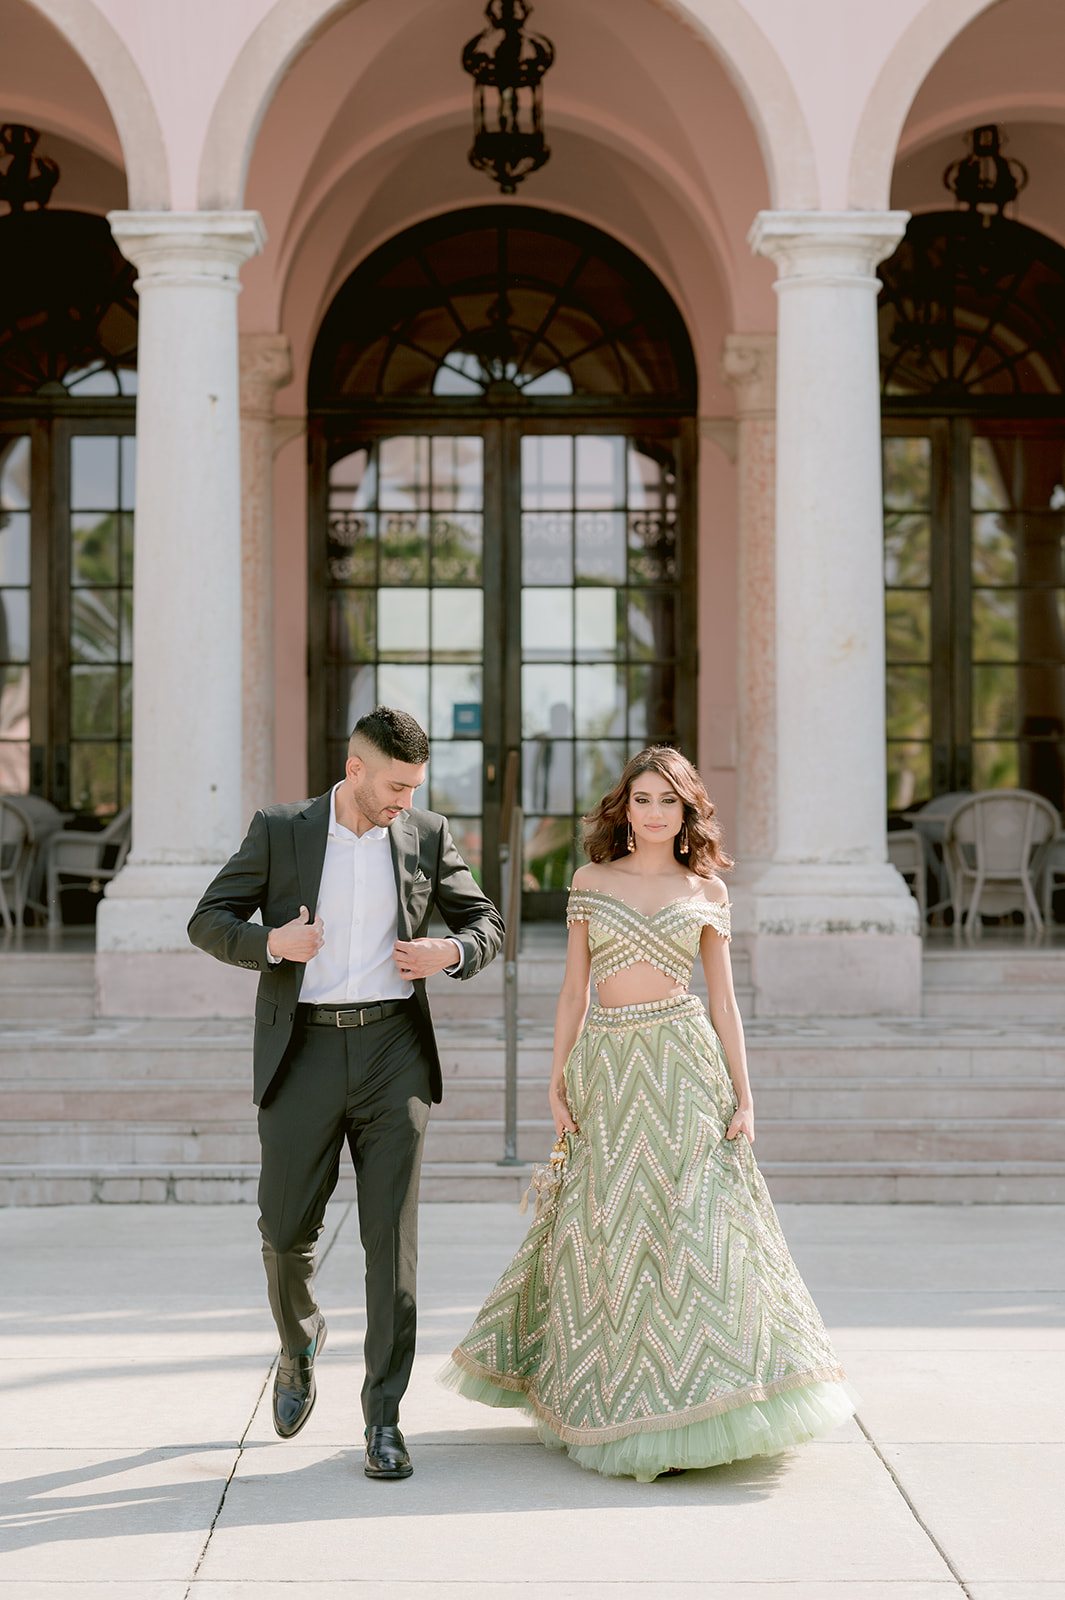 "Ringling Museum engagement session featuring pastel green and gold Indian outfit"
